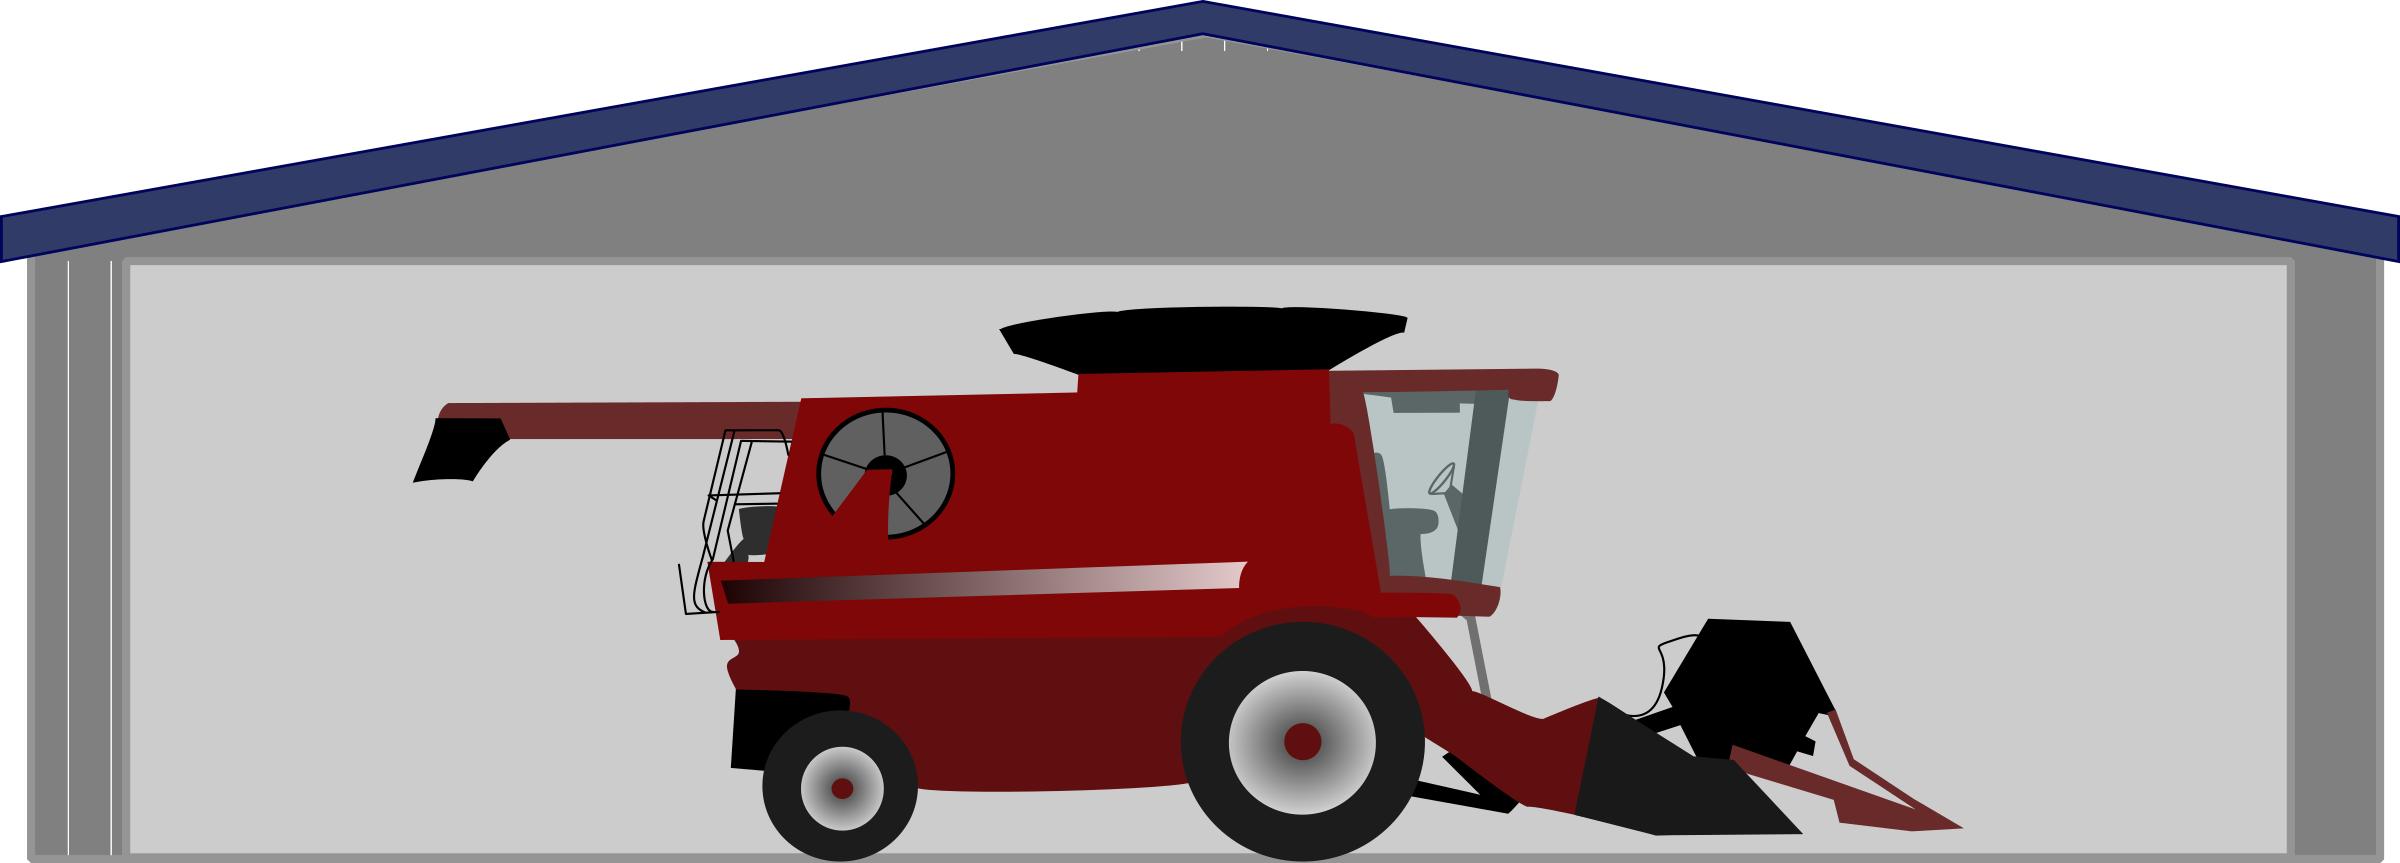 Combine harvester in shed png